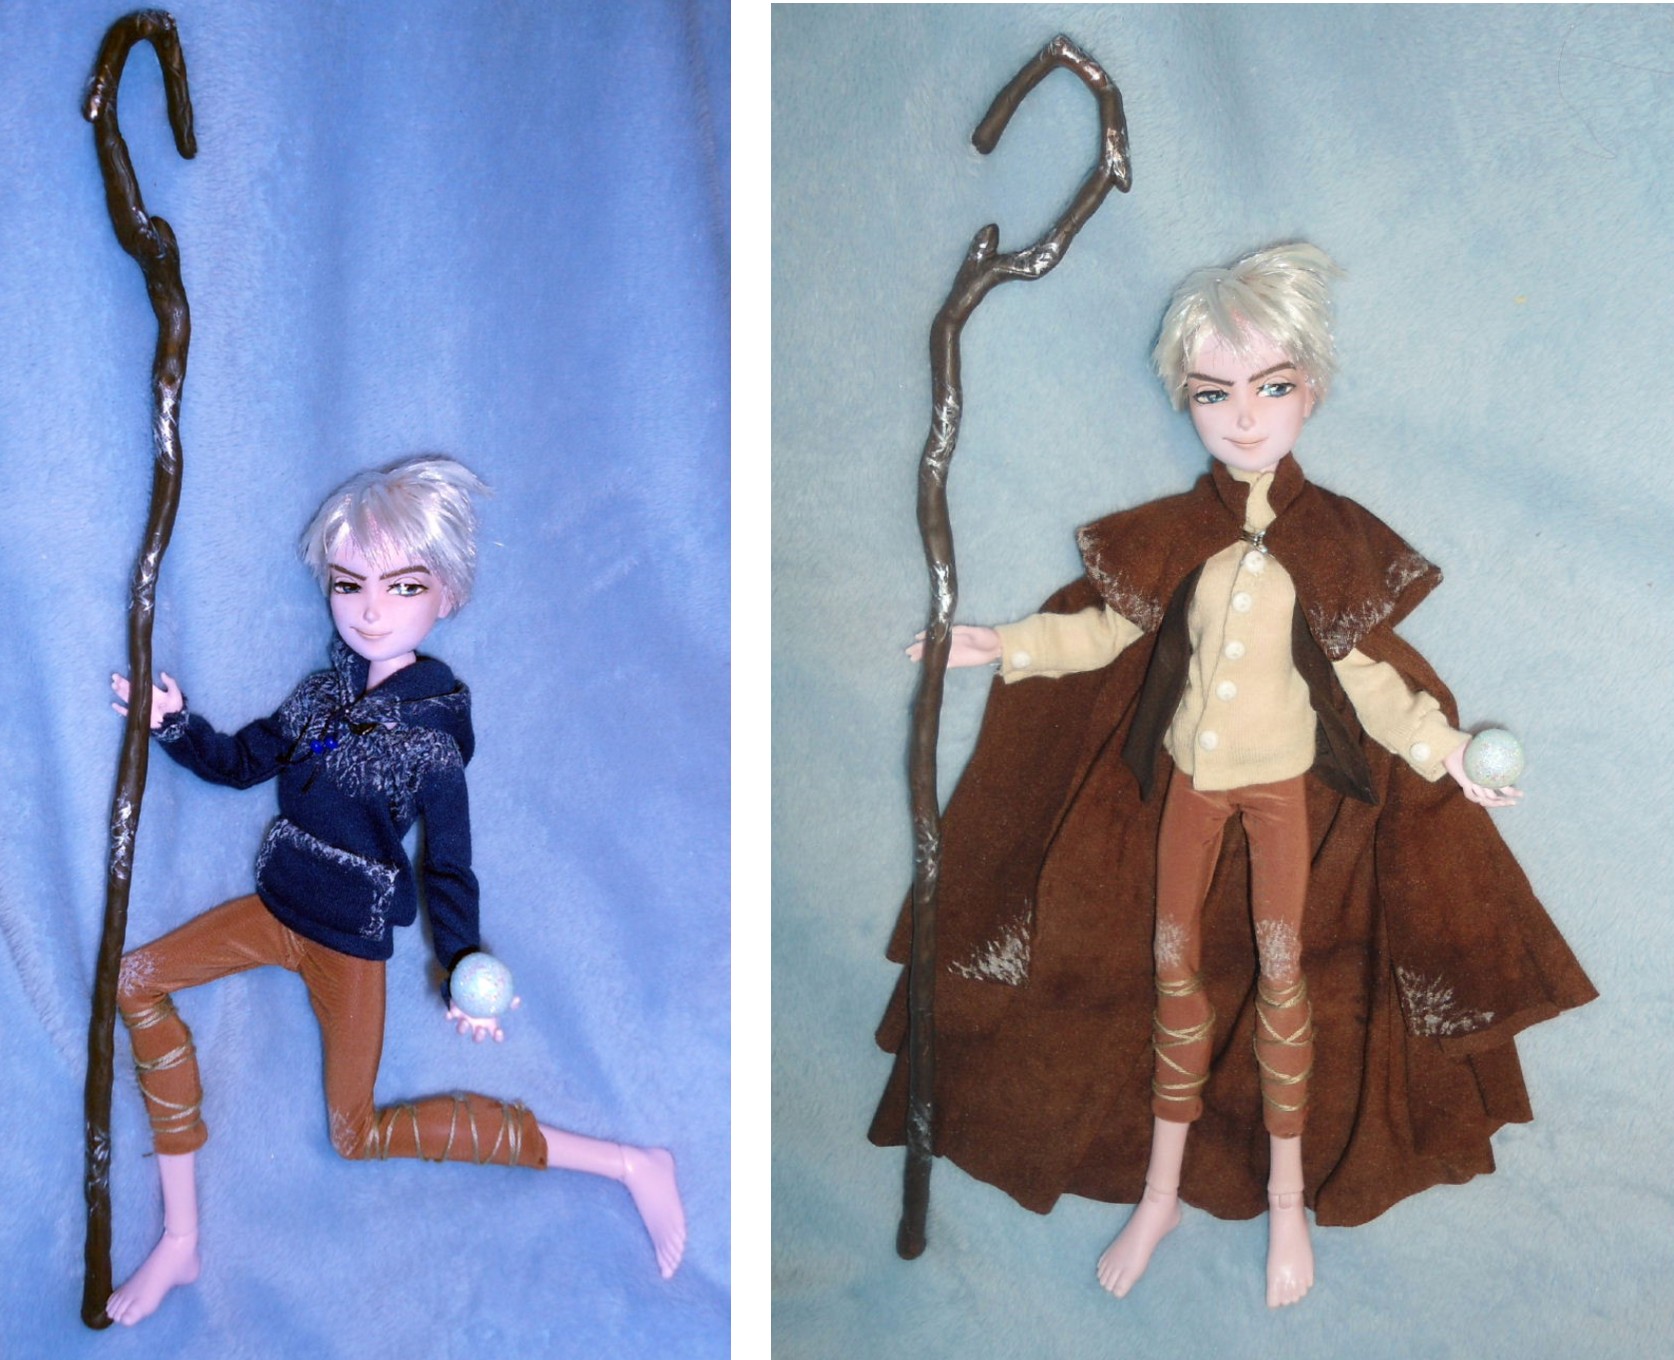 Jack Frost 1/6 OOAK Doll from Rise of the Guardians.